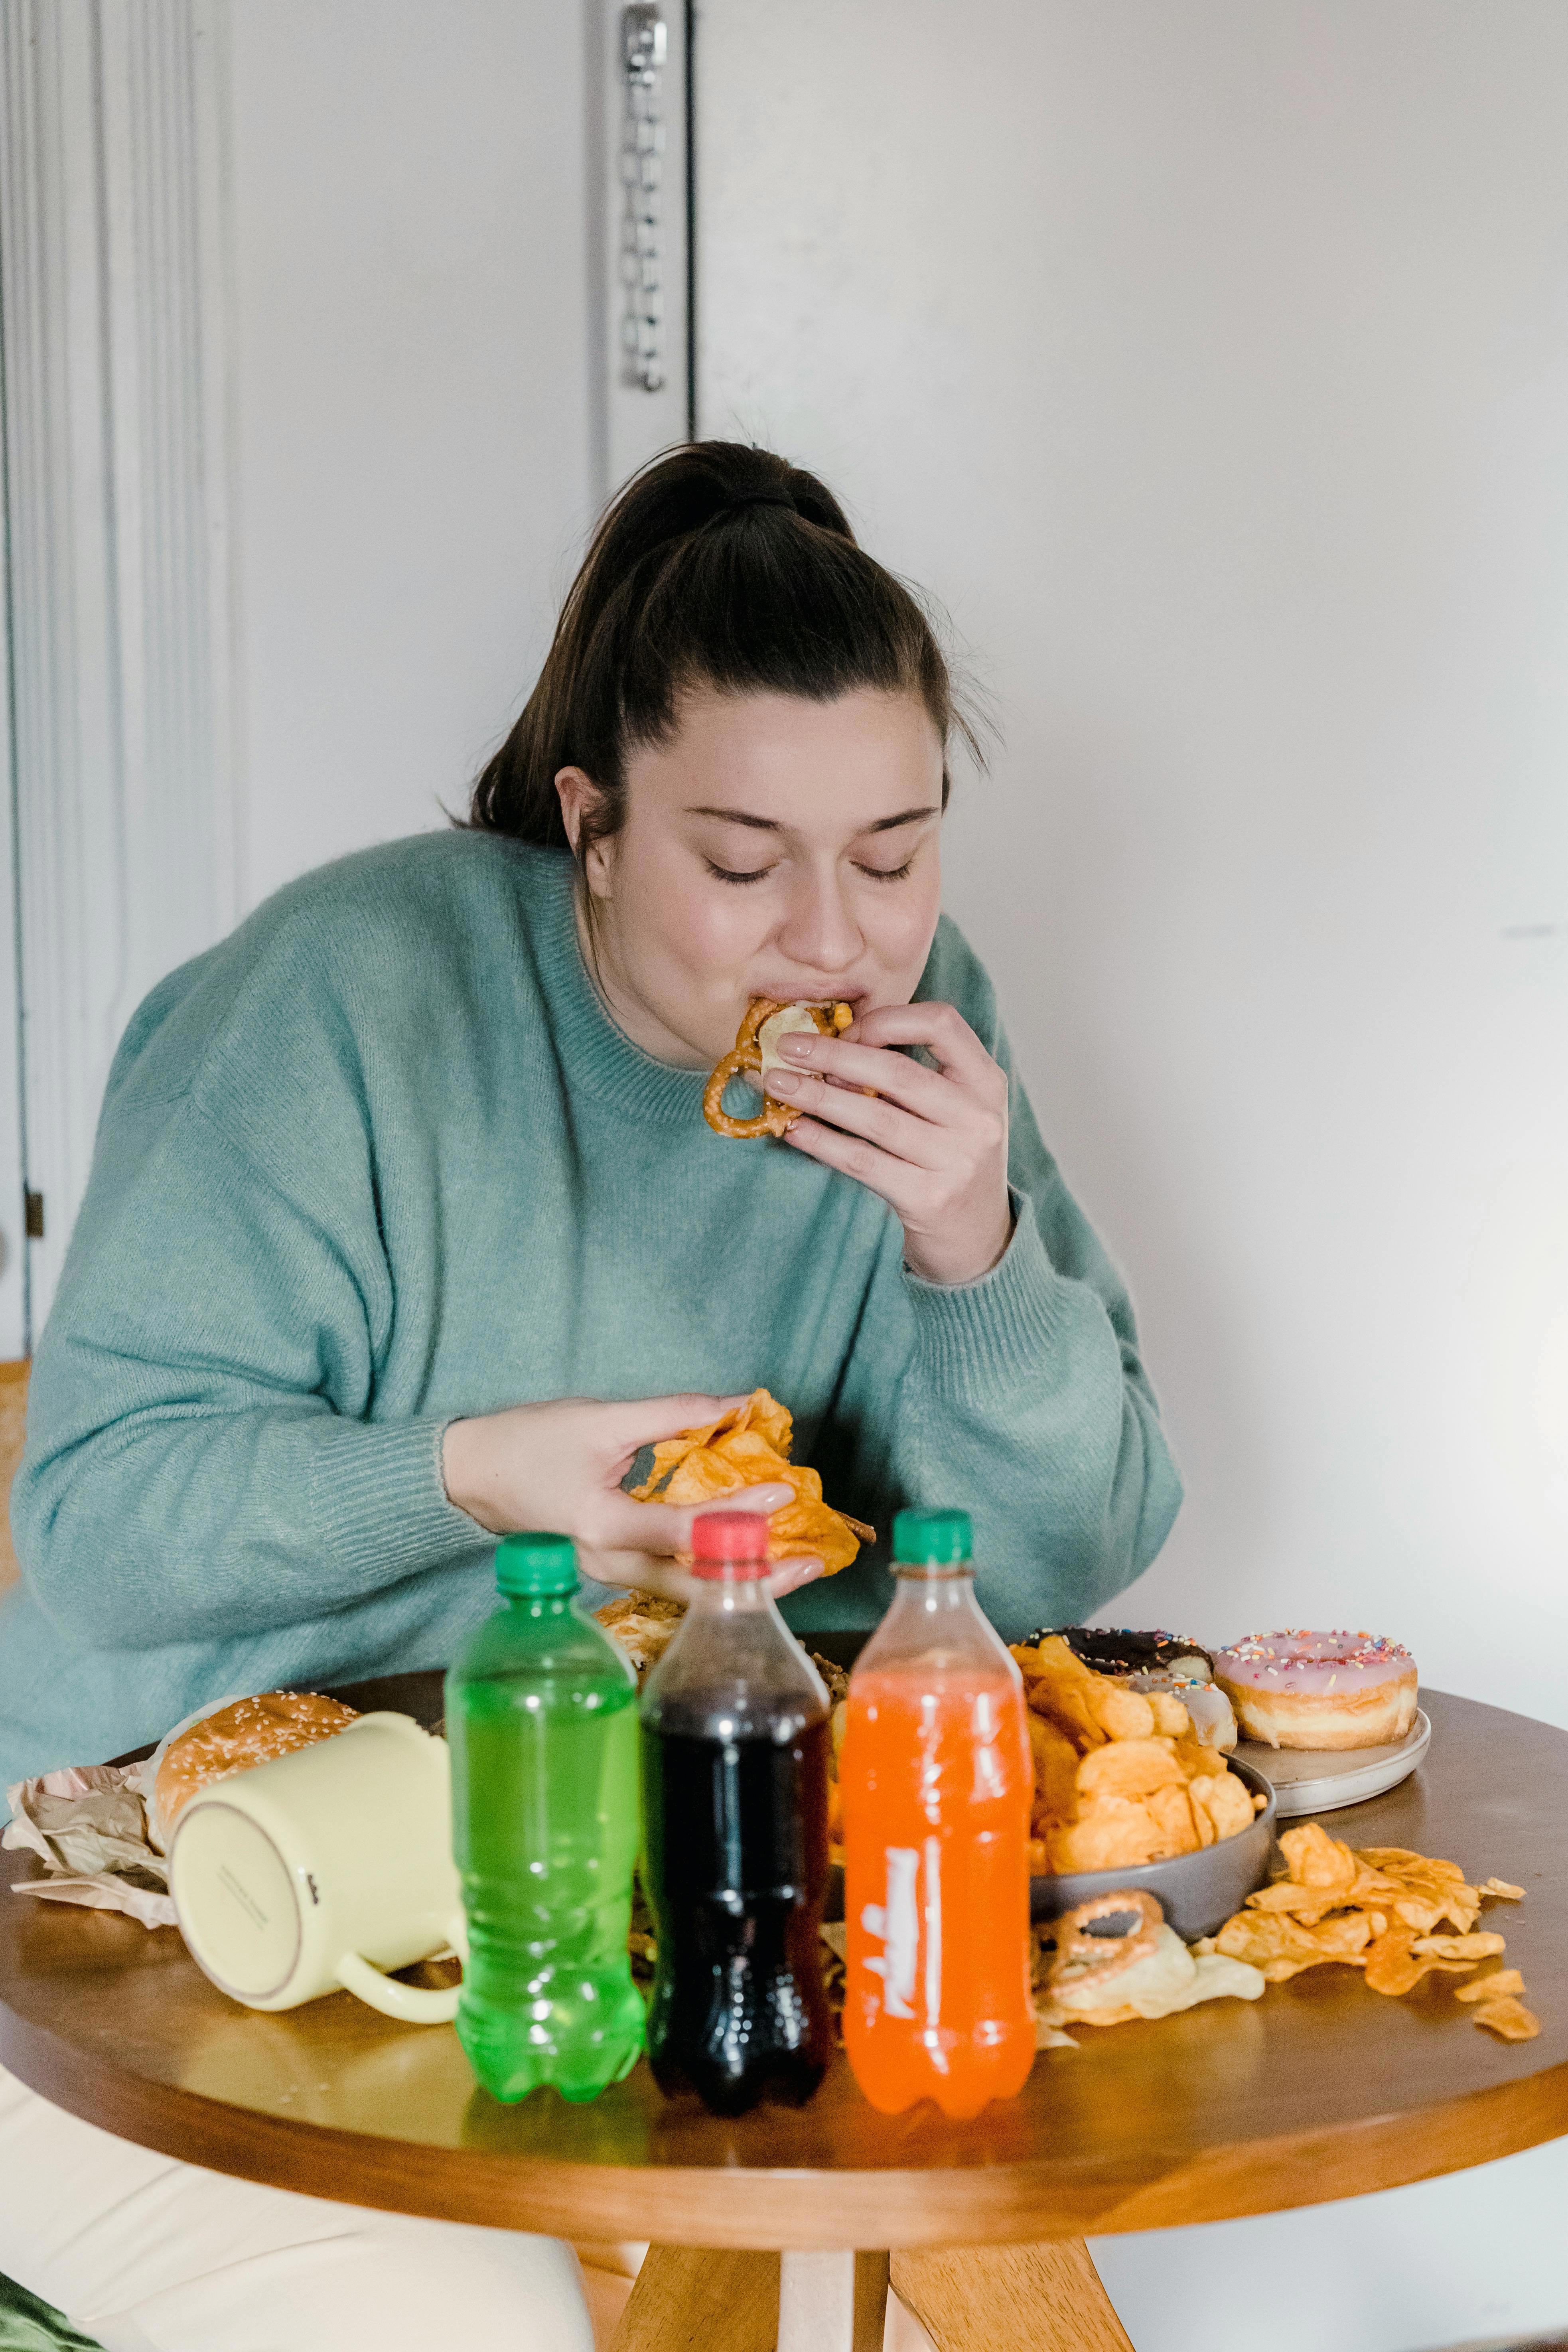 Stock image of a woman eating junk food.